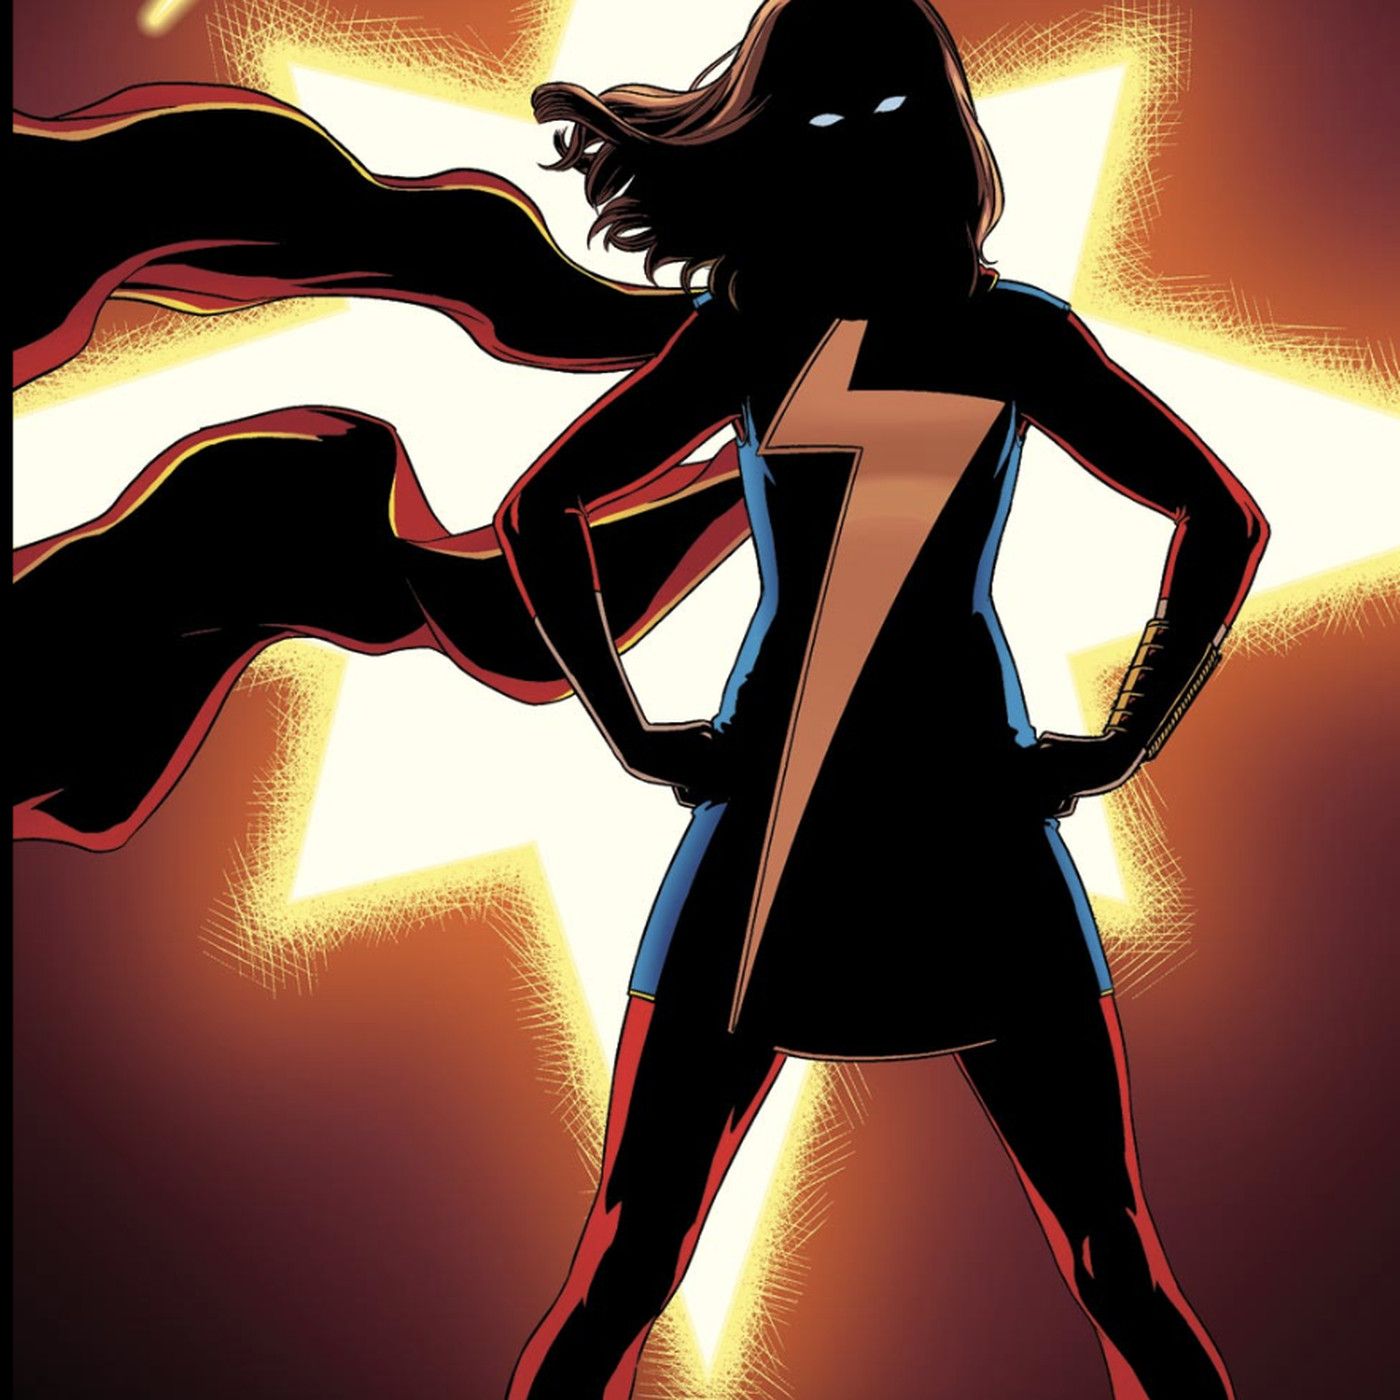 How Ms. Marvel became Marvel's most important superhero